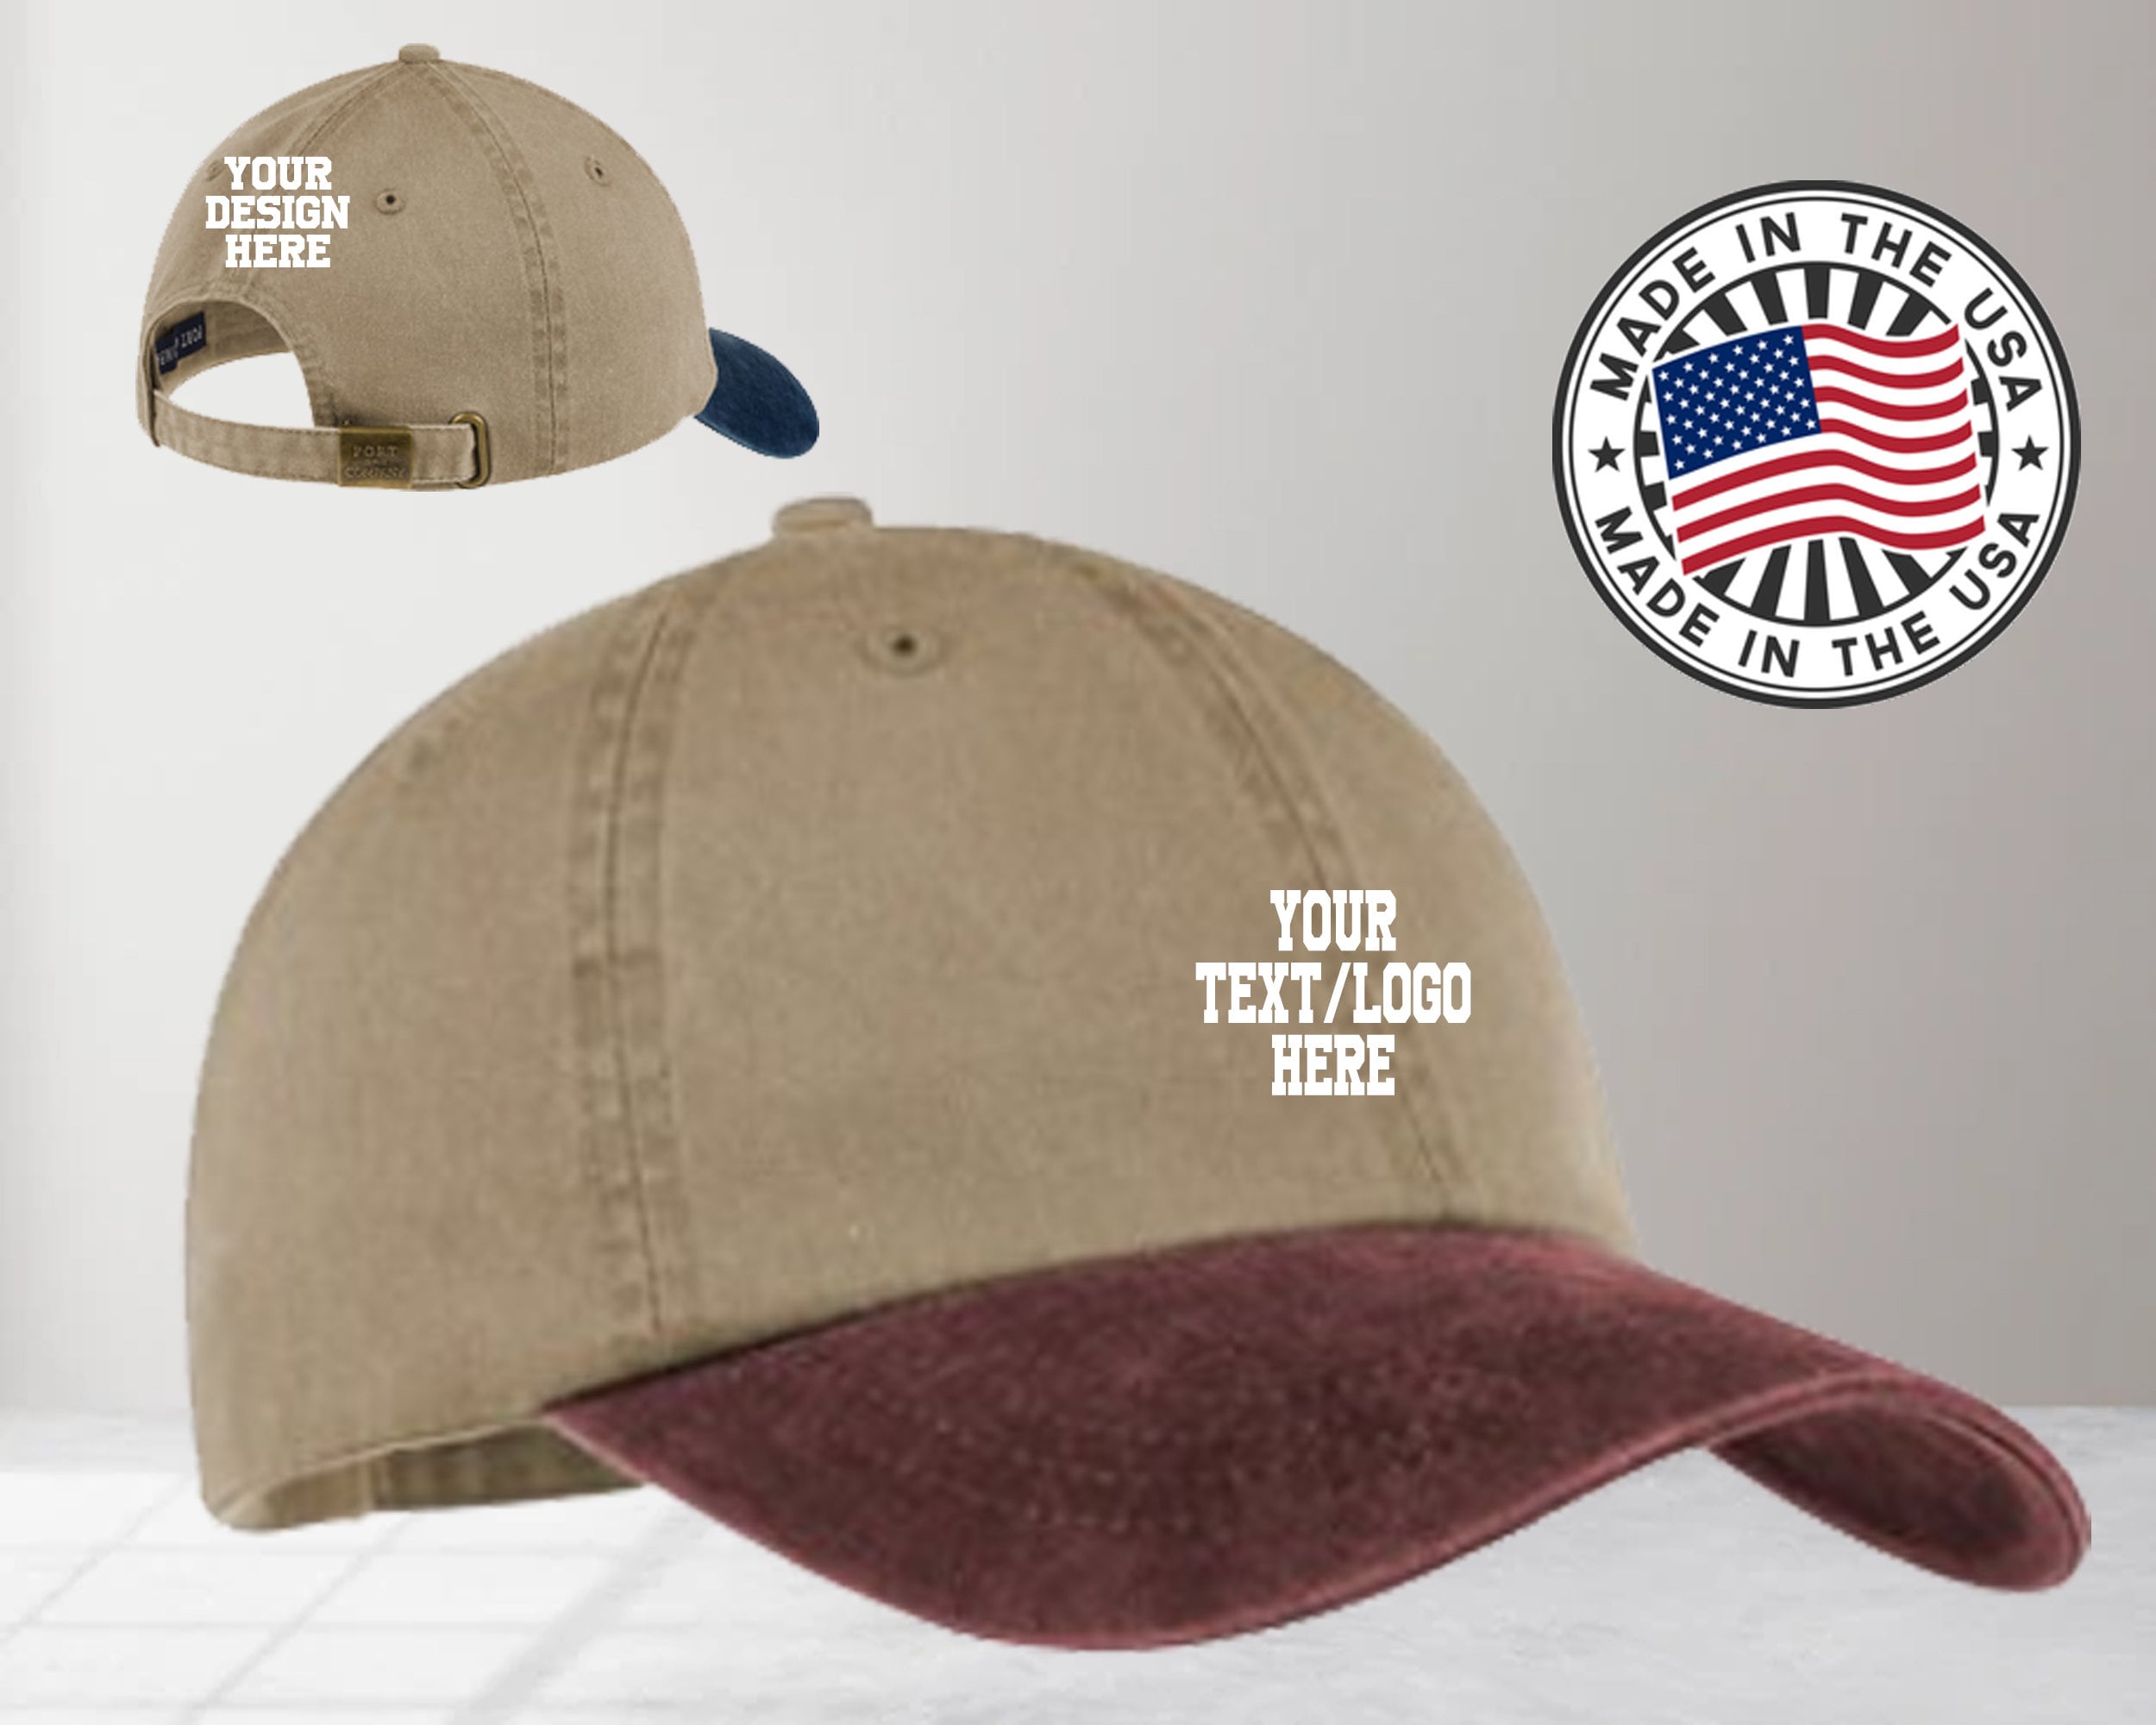 Two-Tone Blank Contrast Mesh Trucker Hats Brown/Creme